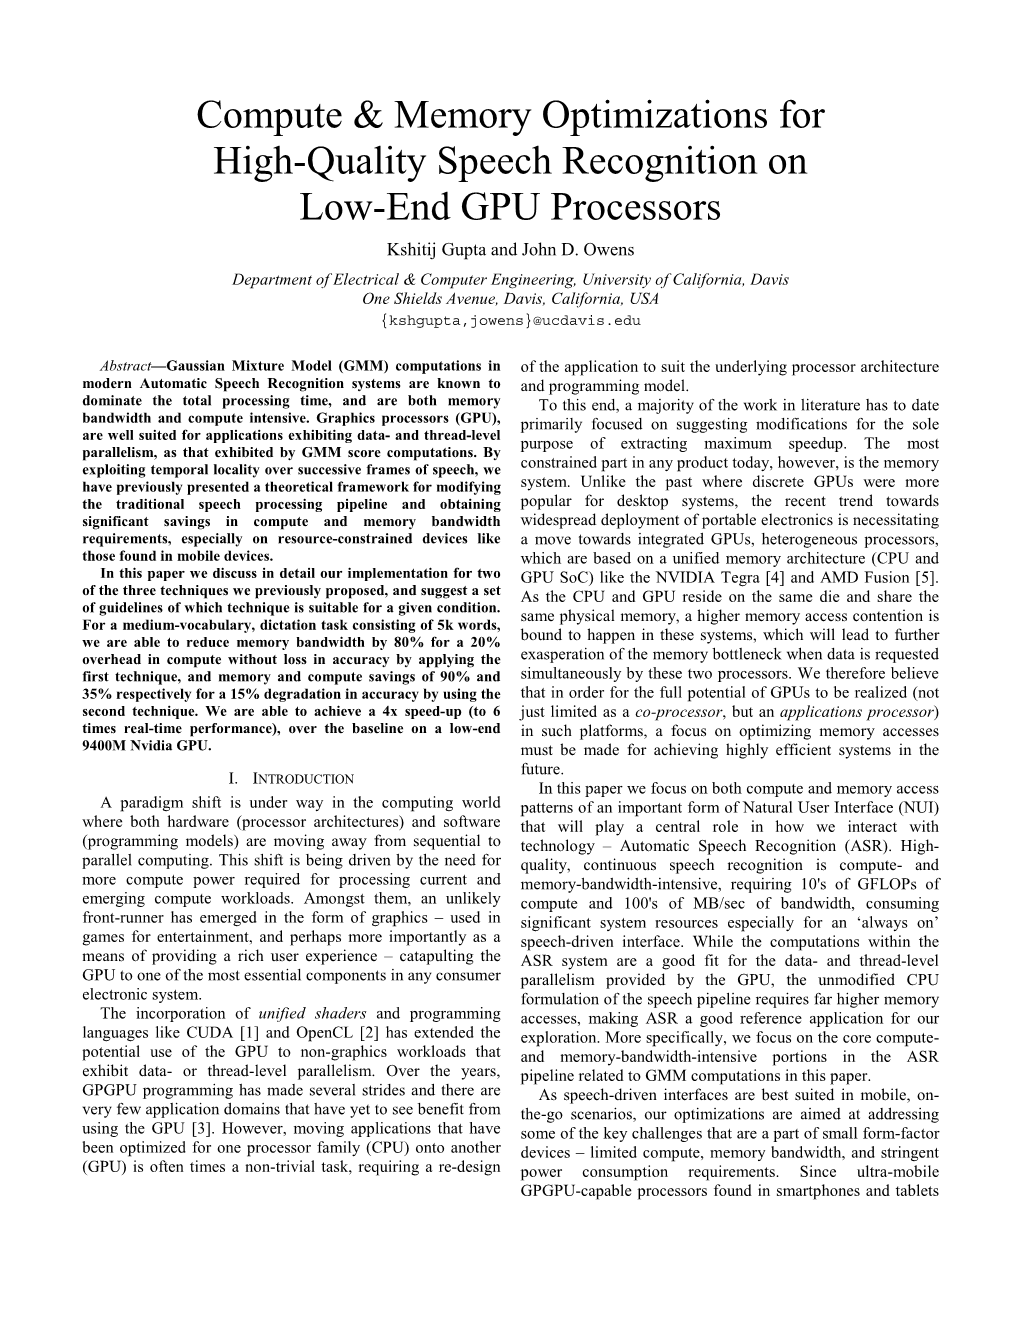 Compute & Memory Optimizations for High-Quality Speech Recognition on Low-End GPU Processors